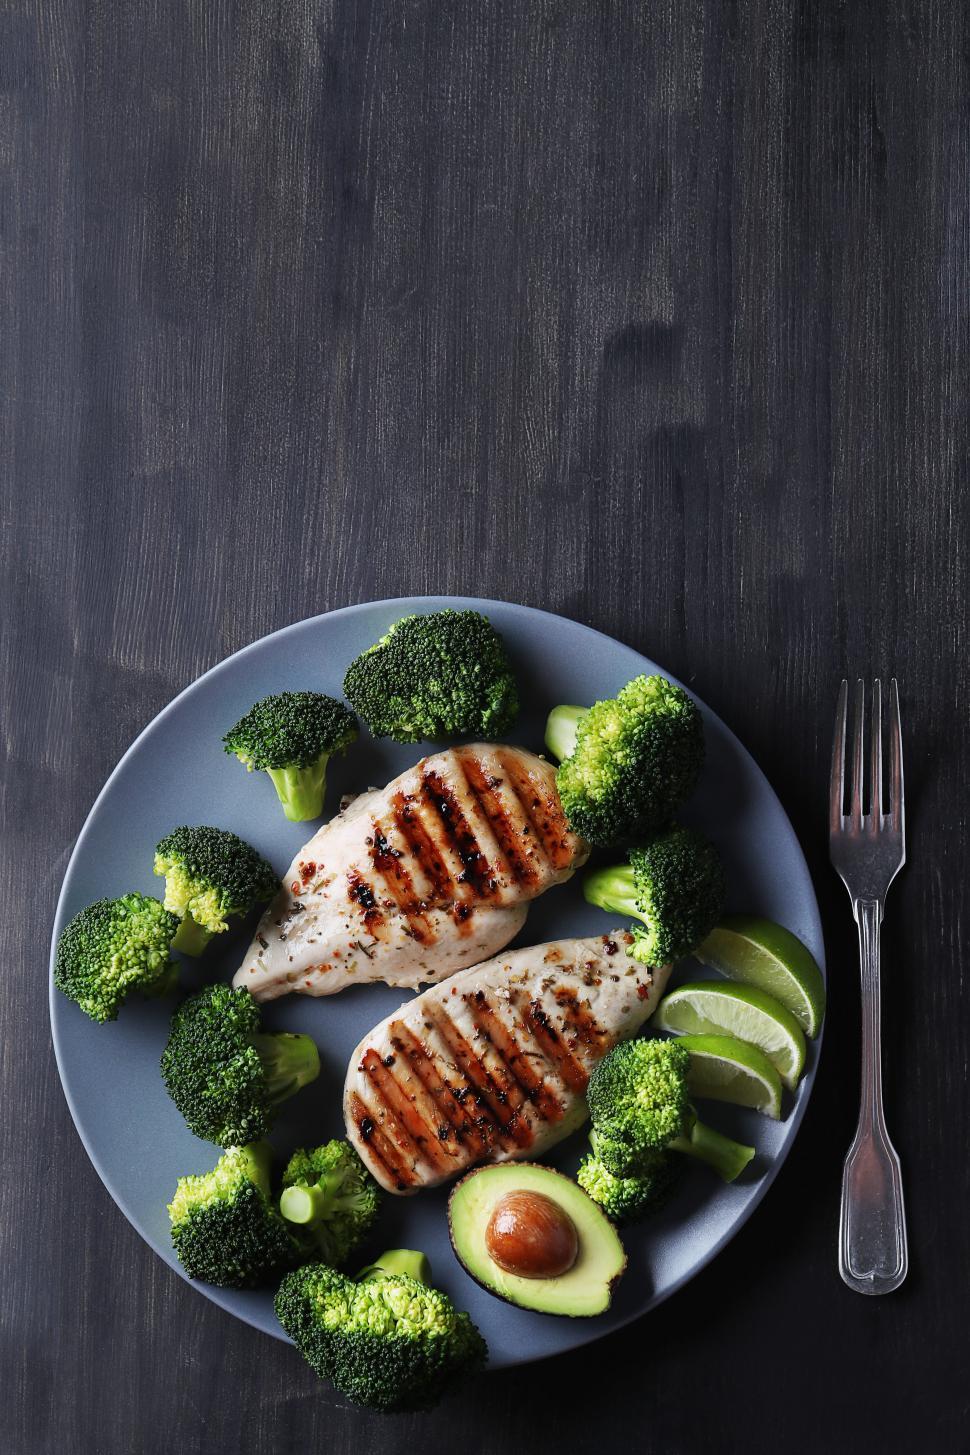 Free Stock Photo of Grilled chicken and broccoli dinner | Download Free ...